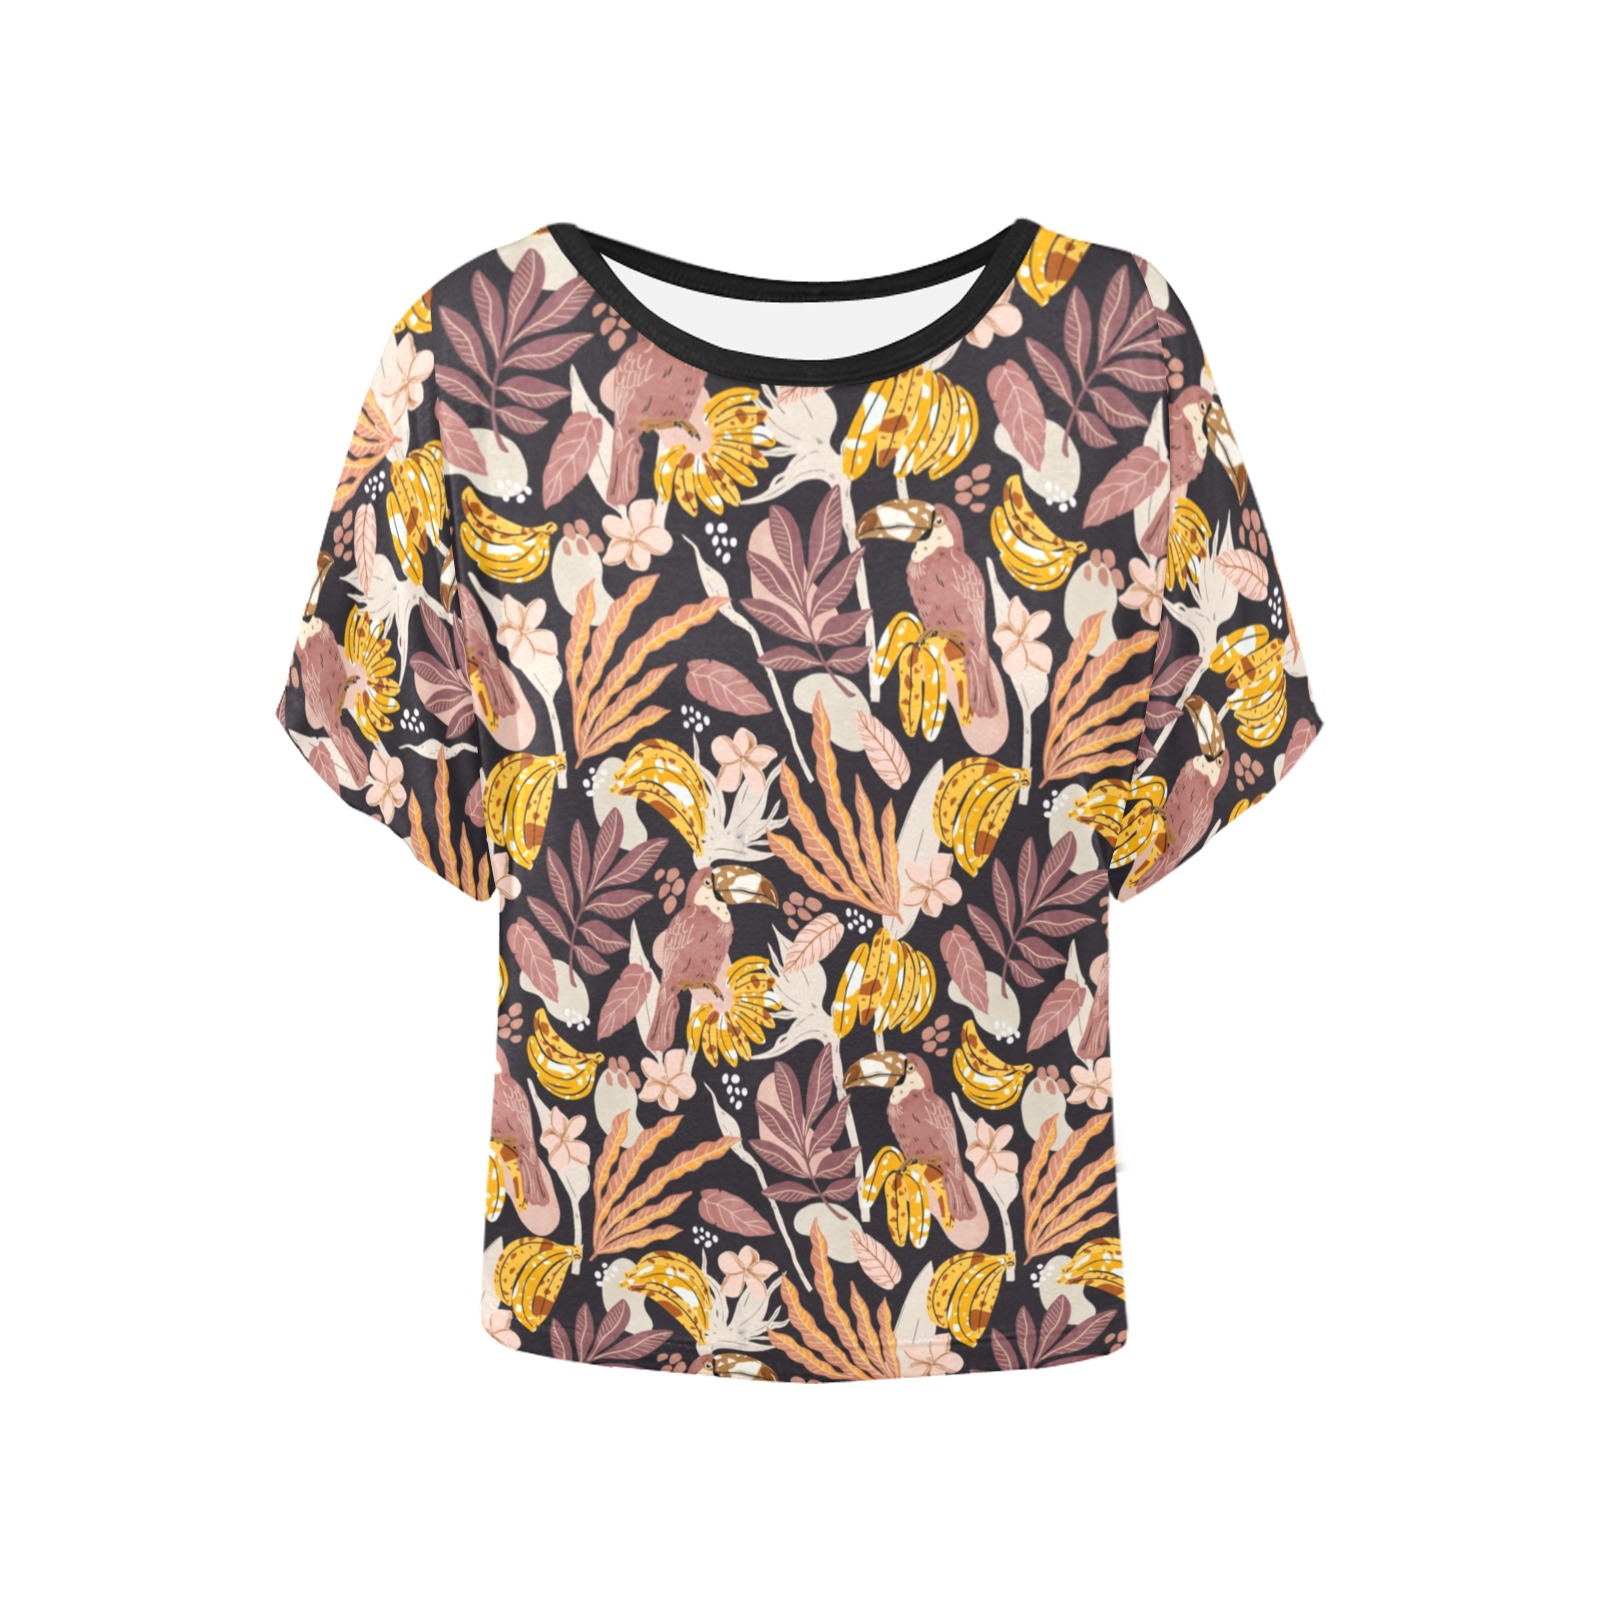 Dark jungle bananas and toucans_01 Women's Batwing-Sleeved Blouse T shirt (Model T44)